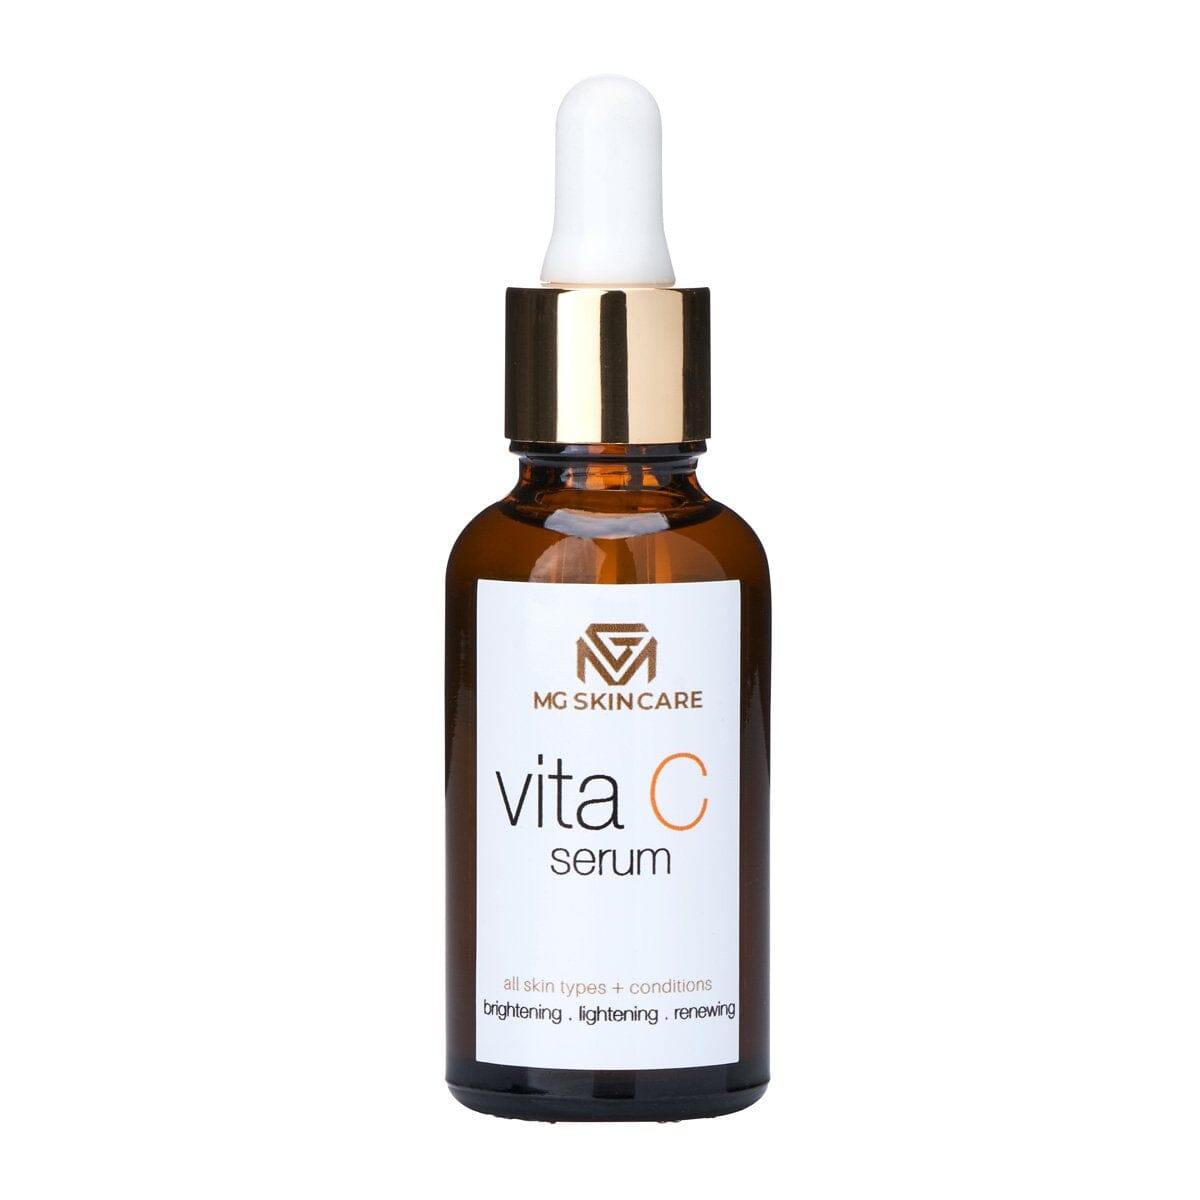 yourself today and discover the power of our Vita C Serum 7.5% - The Ultimate Skincare Solution for a Brighter, Firmer, and More Radiant Complexion! Beauty & Health - Skin Care - Face MG Skincare 